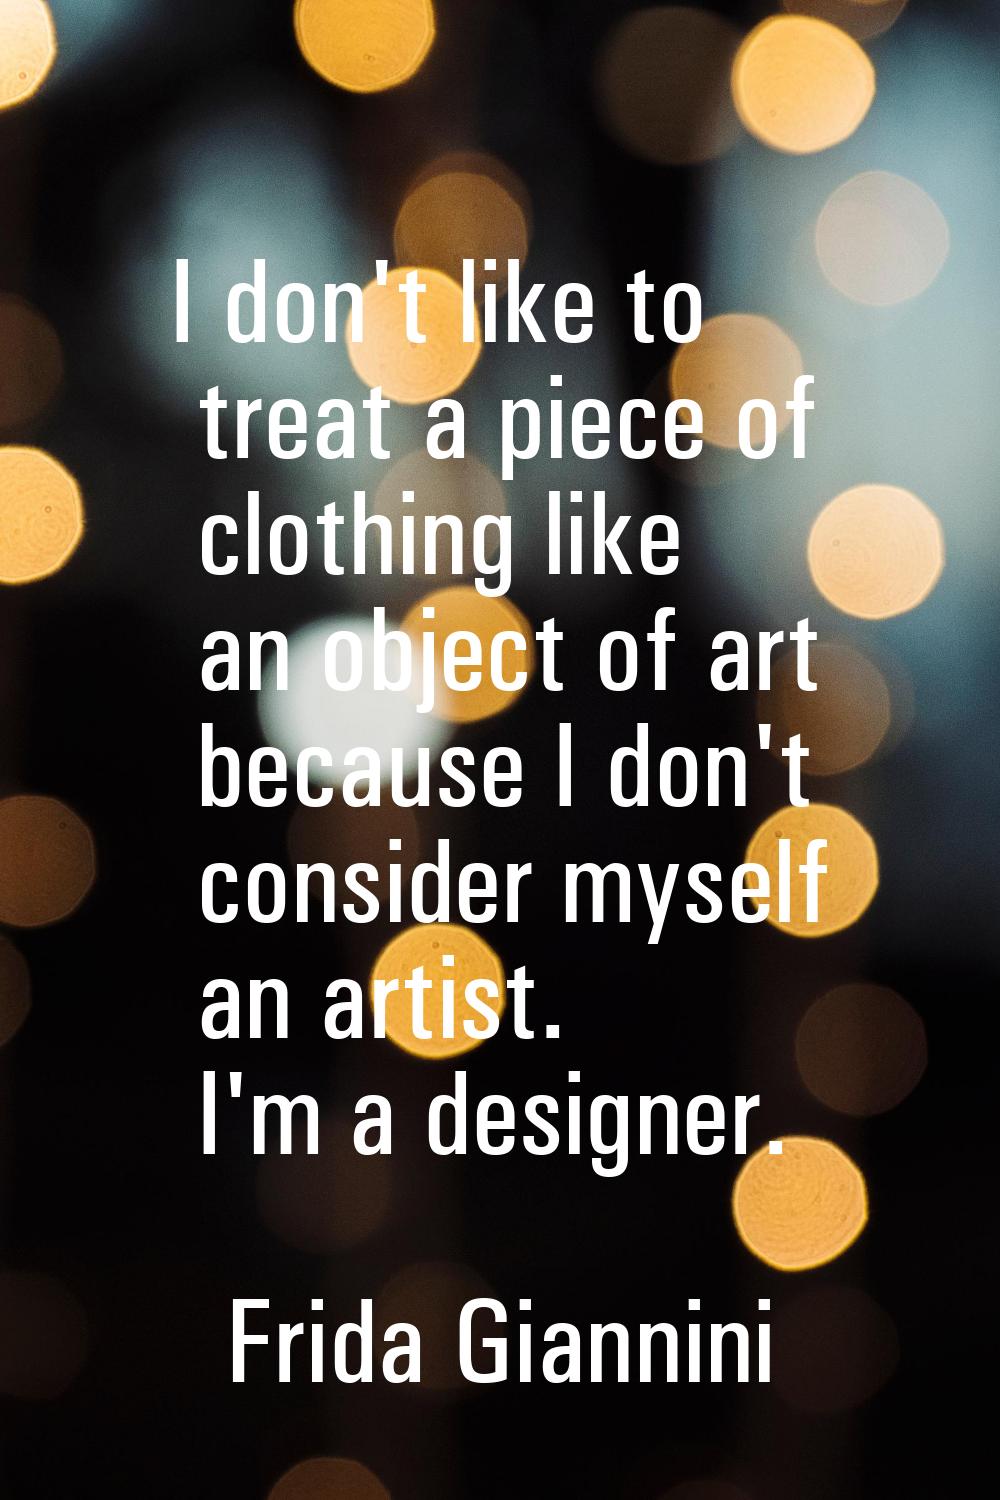 I don't like to treat a piece of clothing like an object of art because I don't consider myself an 